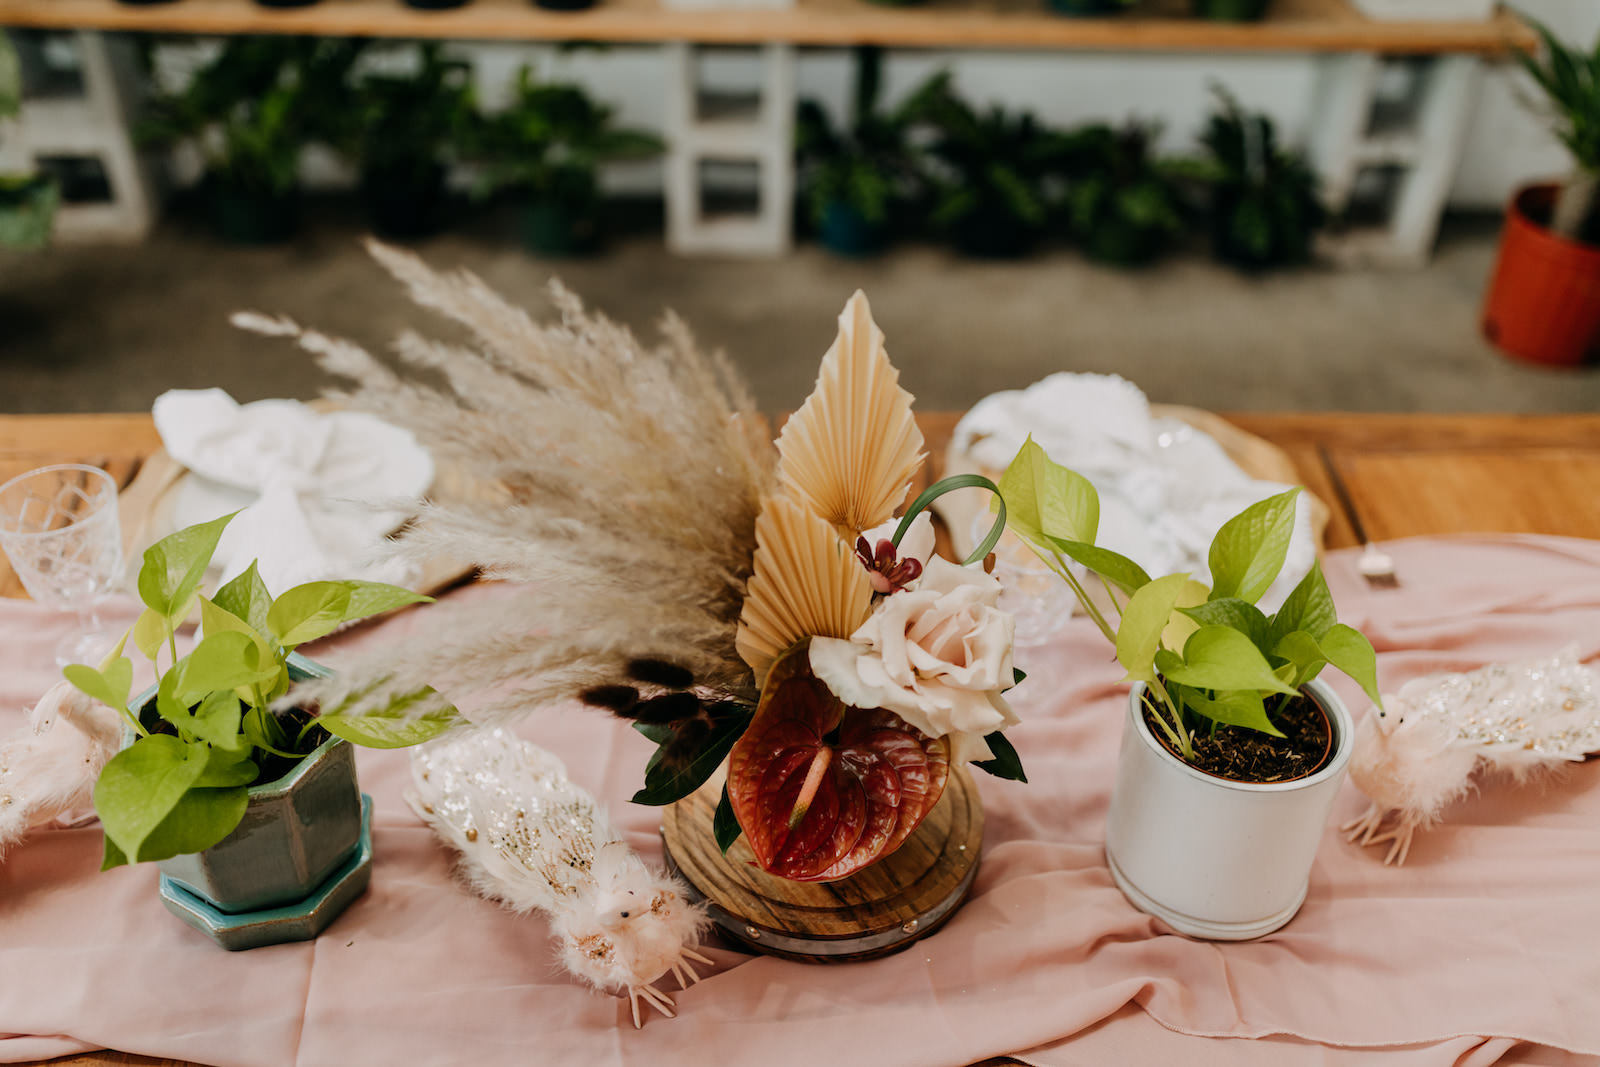 Boho Styled Shoot Decor | Unique Floral Centerpiece, Pampas Grass, Dried Flowers, Ivory Roses, Pink Anthurium, Greenery Plants, Blush Pink Table Runner, White Peacock Statue Decorations | Wedding Planner Elope Tampa Bay | Amber McWhorter Photography